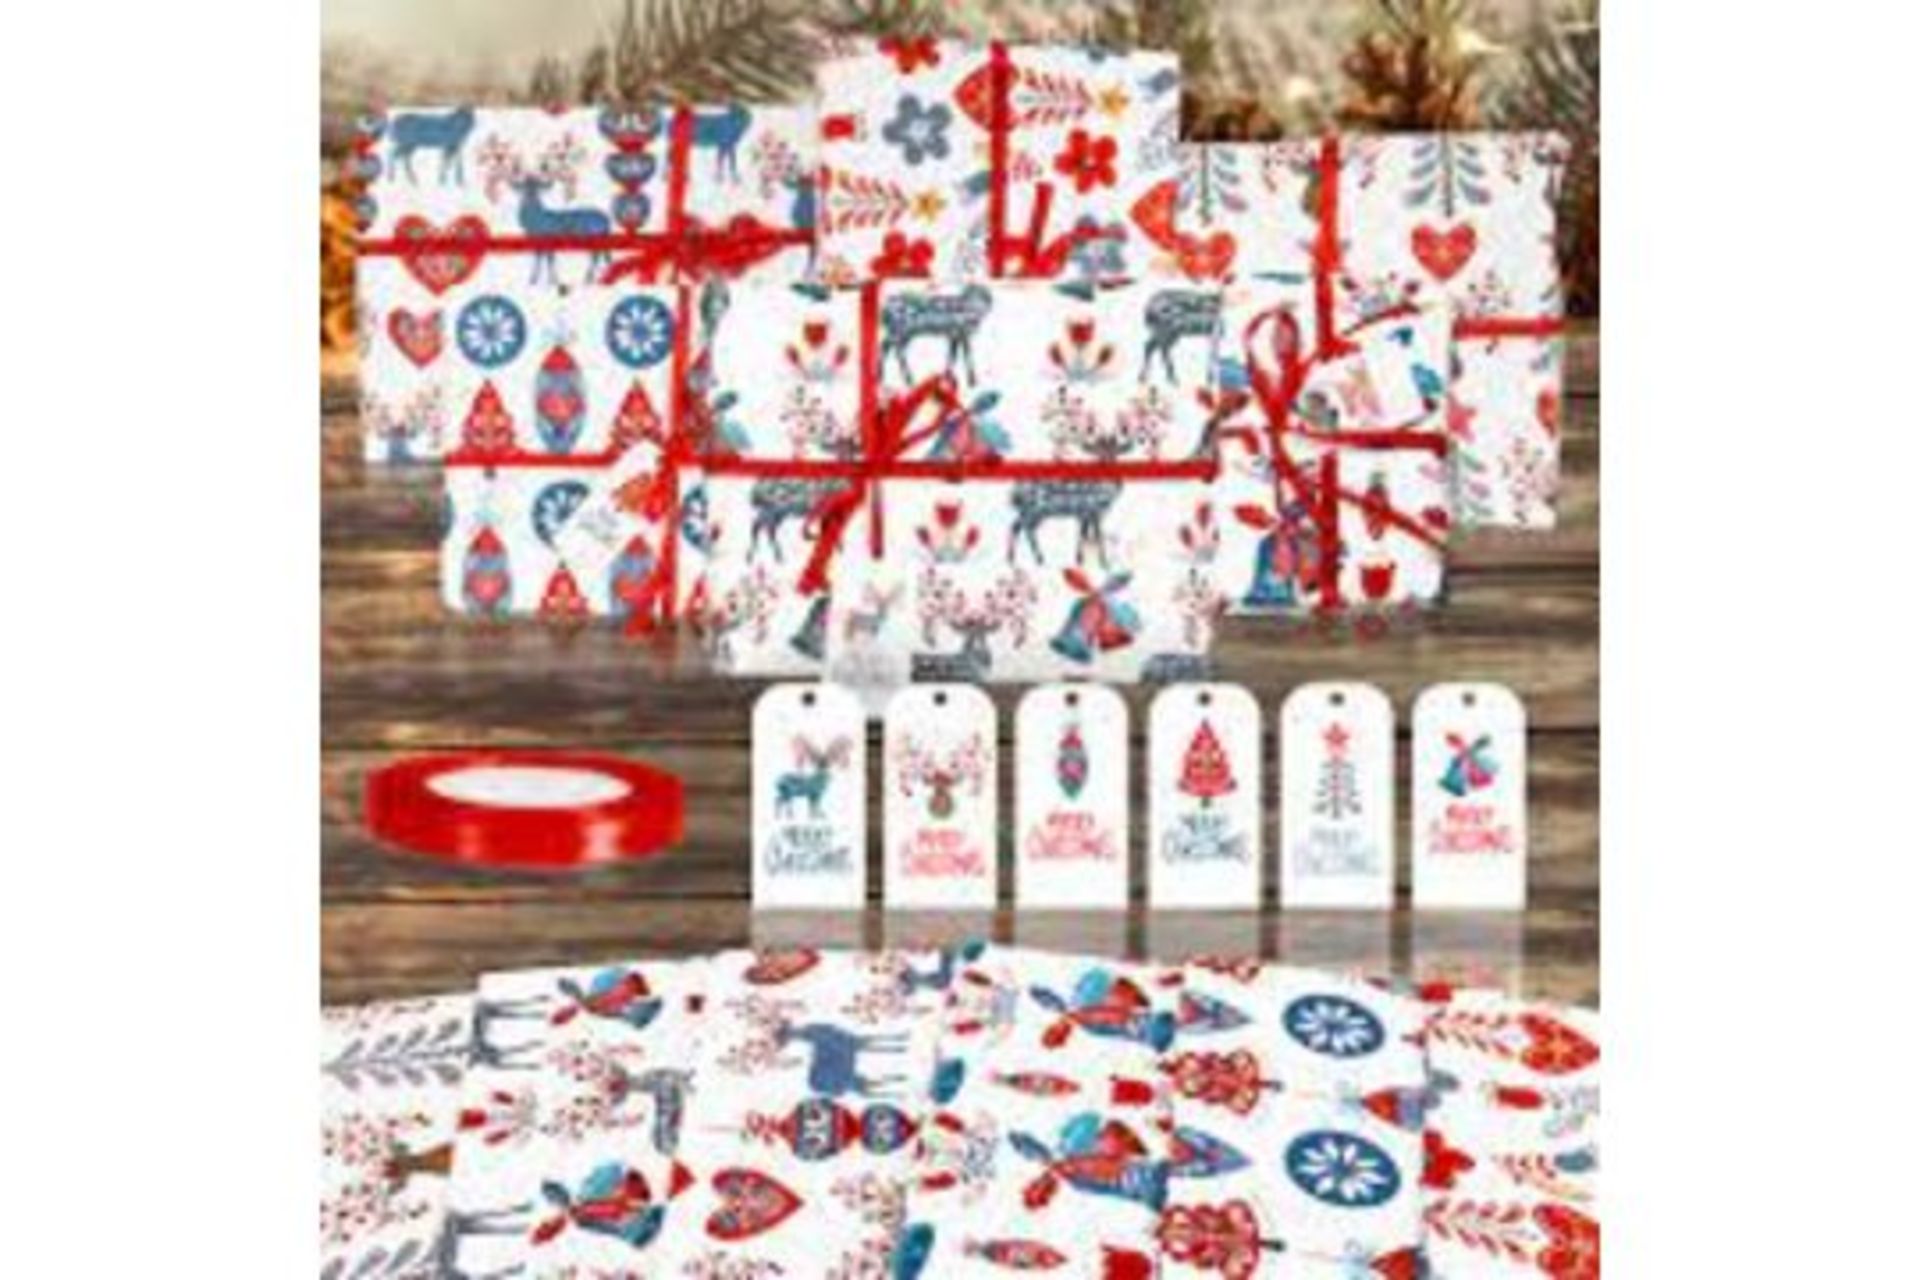 TRADE LOT 600 X BRAND NEW ASSORTED SETS OF 6 FOLDED SHEETS LUXURY CHRISTMAS WRAPPING PAPER SETS IN - Image 4 of 4